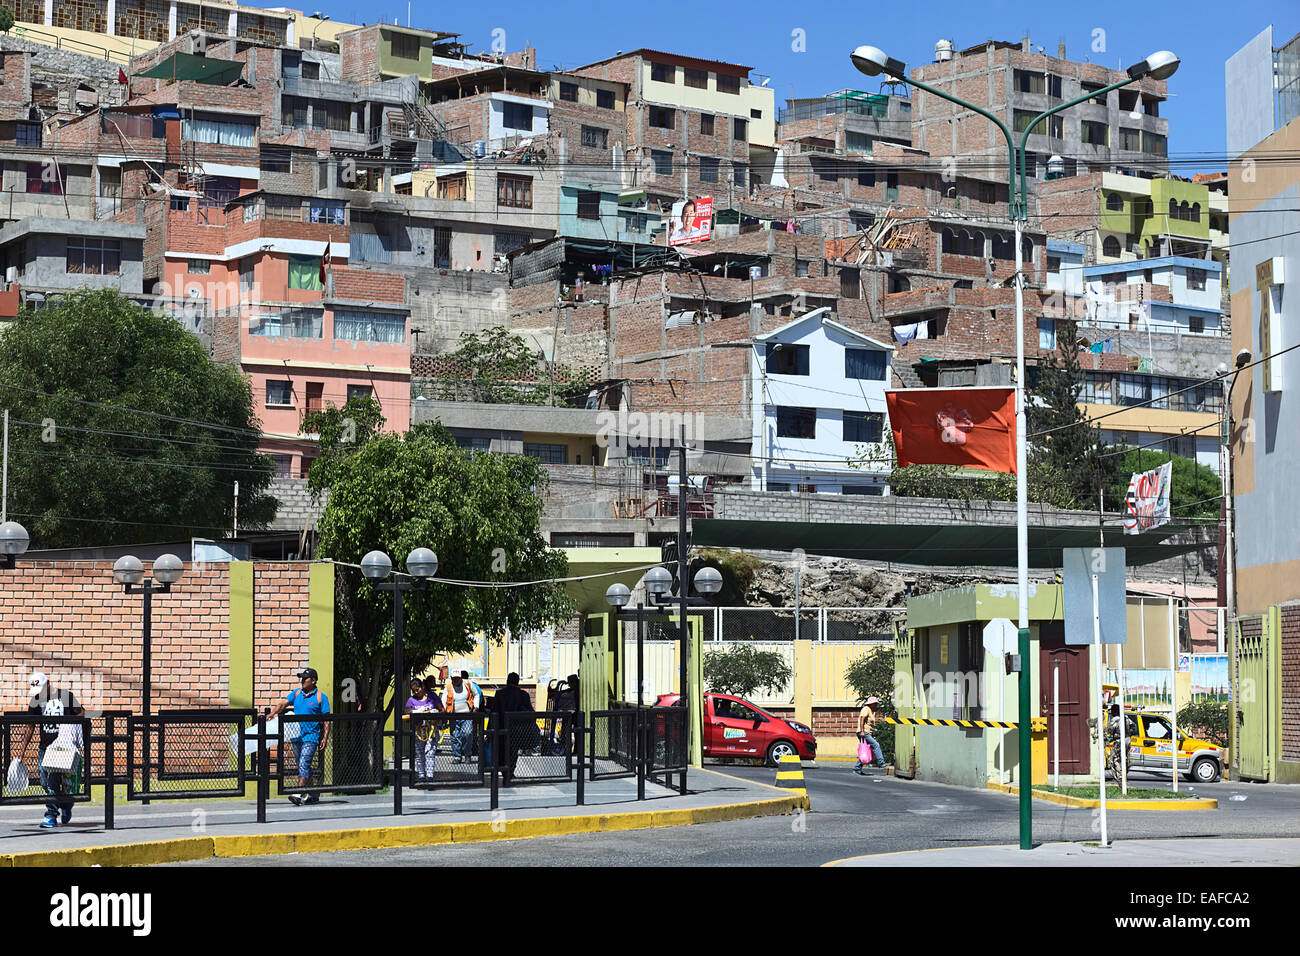 The entrance and exit of the Terminal Terrestre (bus terminal) along Javier Perez de Cuellar Avenue in Arequipa, Peru Stock Photo